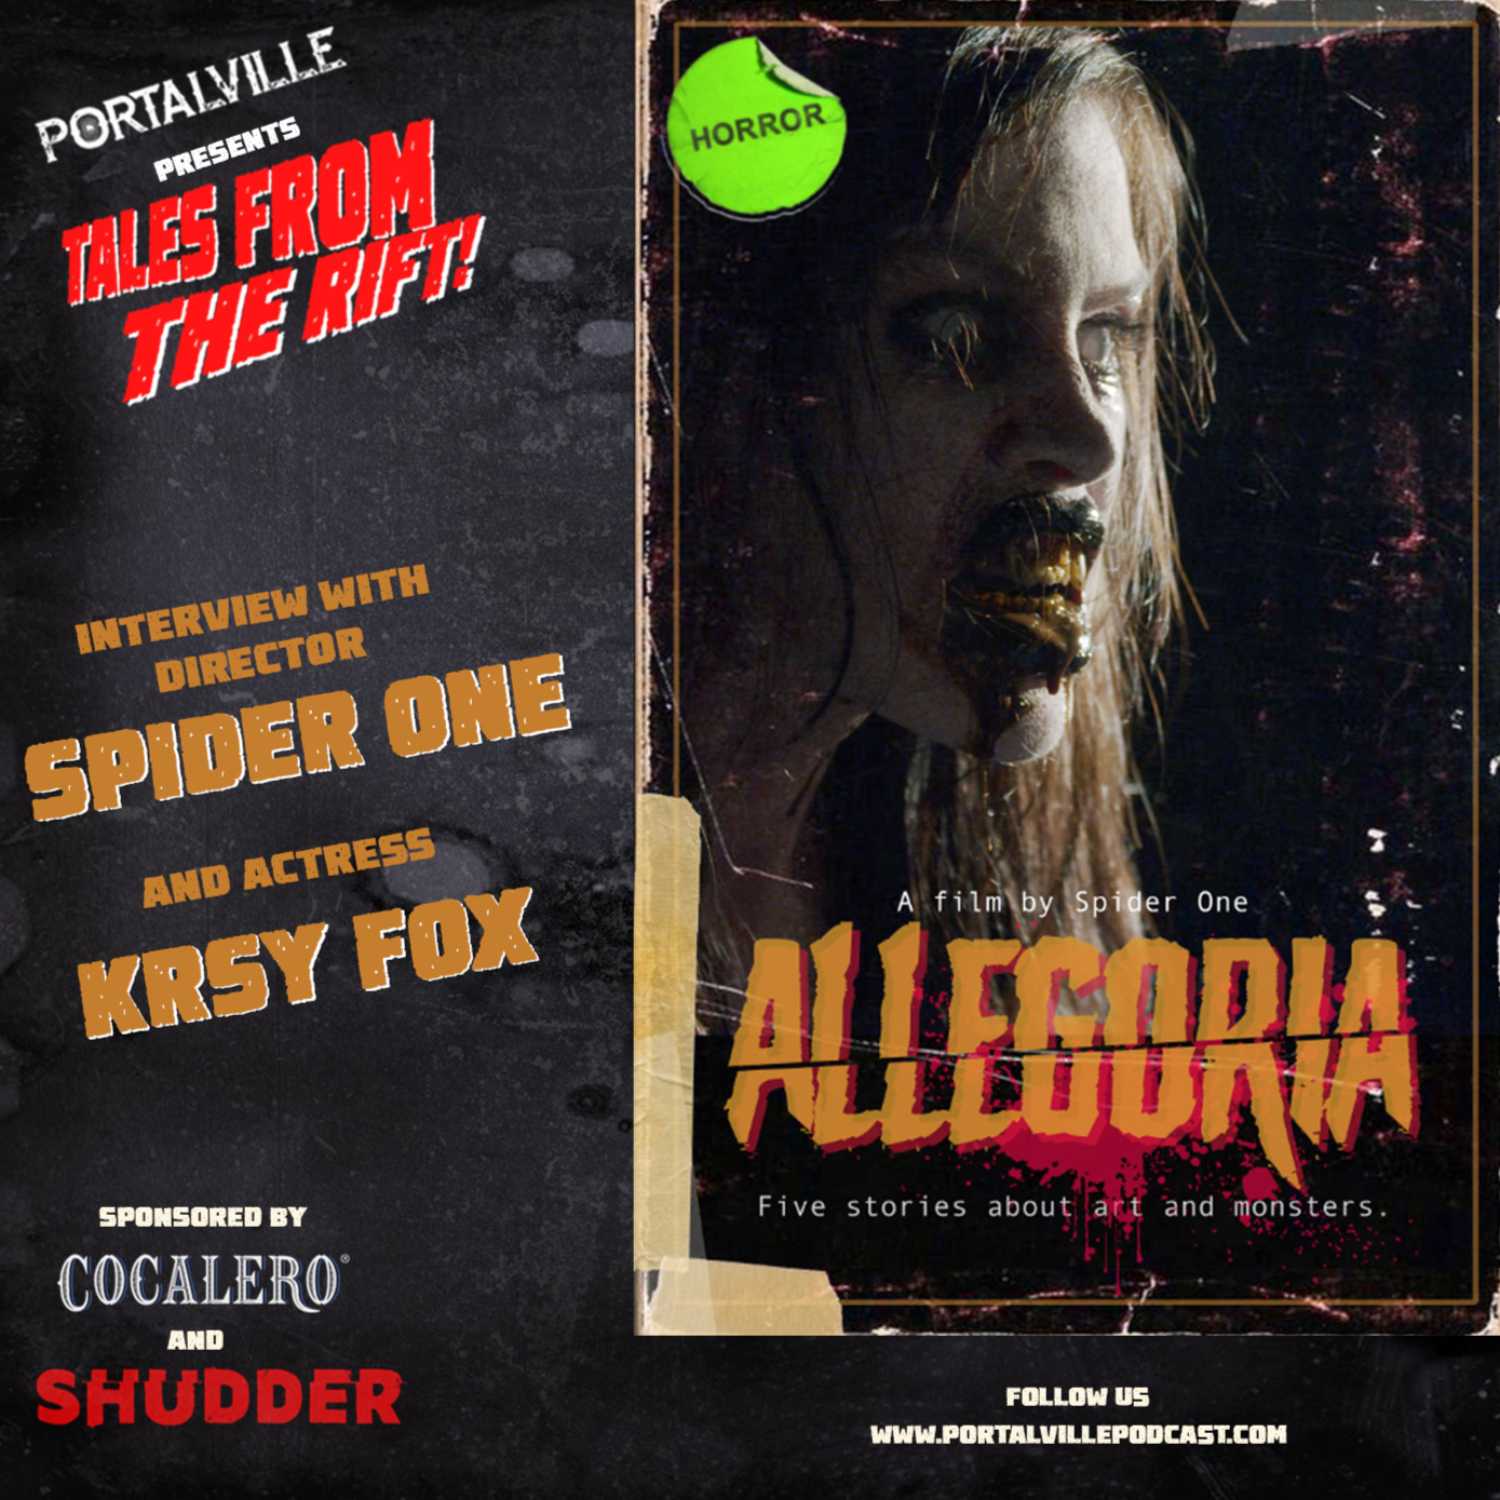 Episode image for Allegoria - Interview with Spider One and Krsy Fox